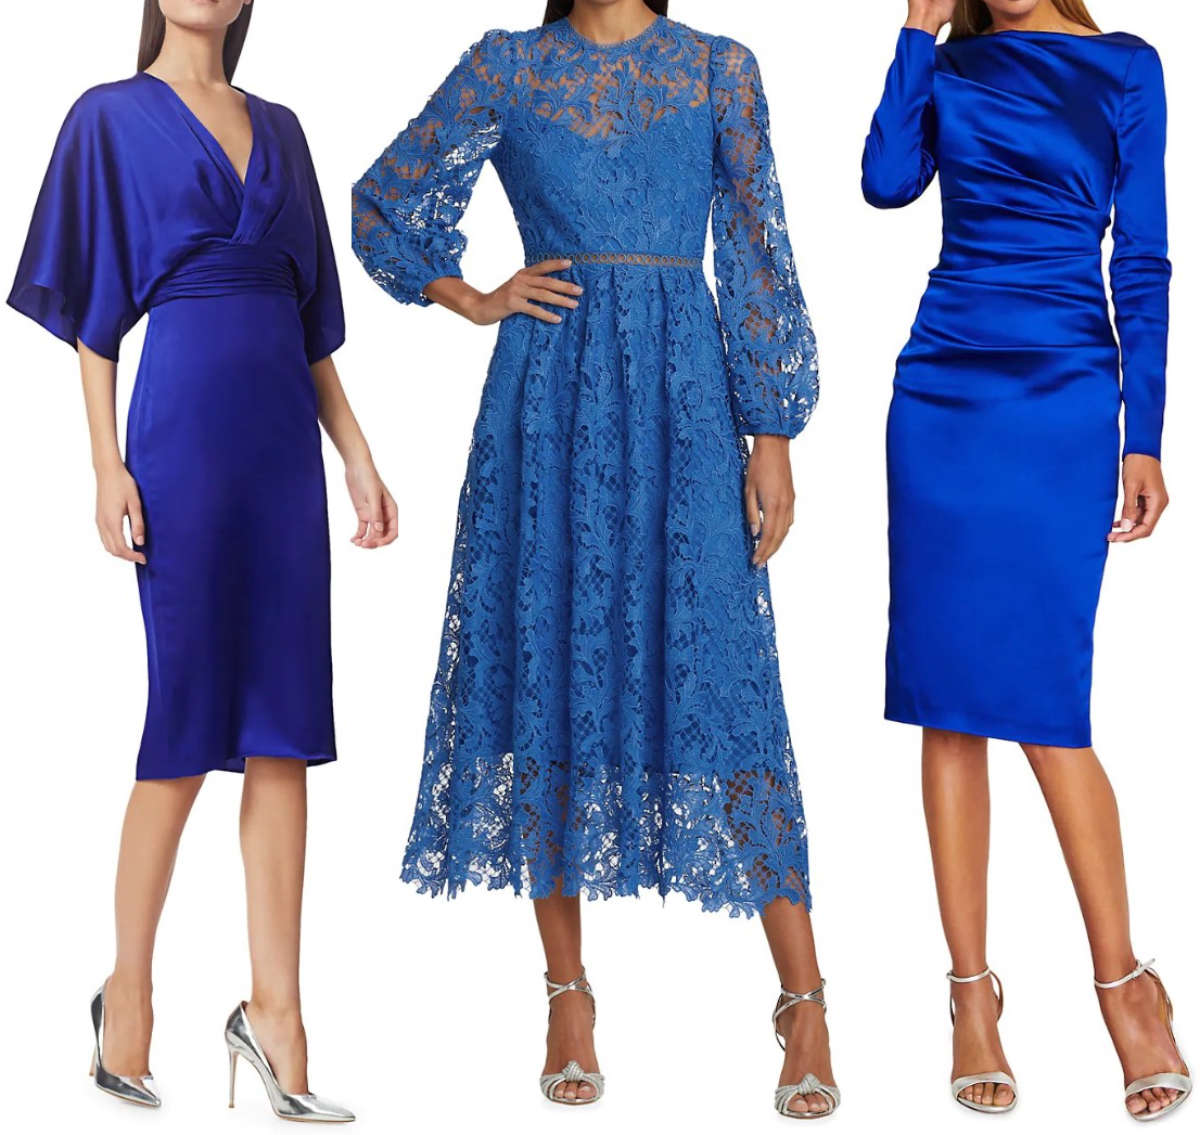 Royal Blue Dress With Shoes - Encycloall